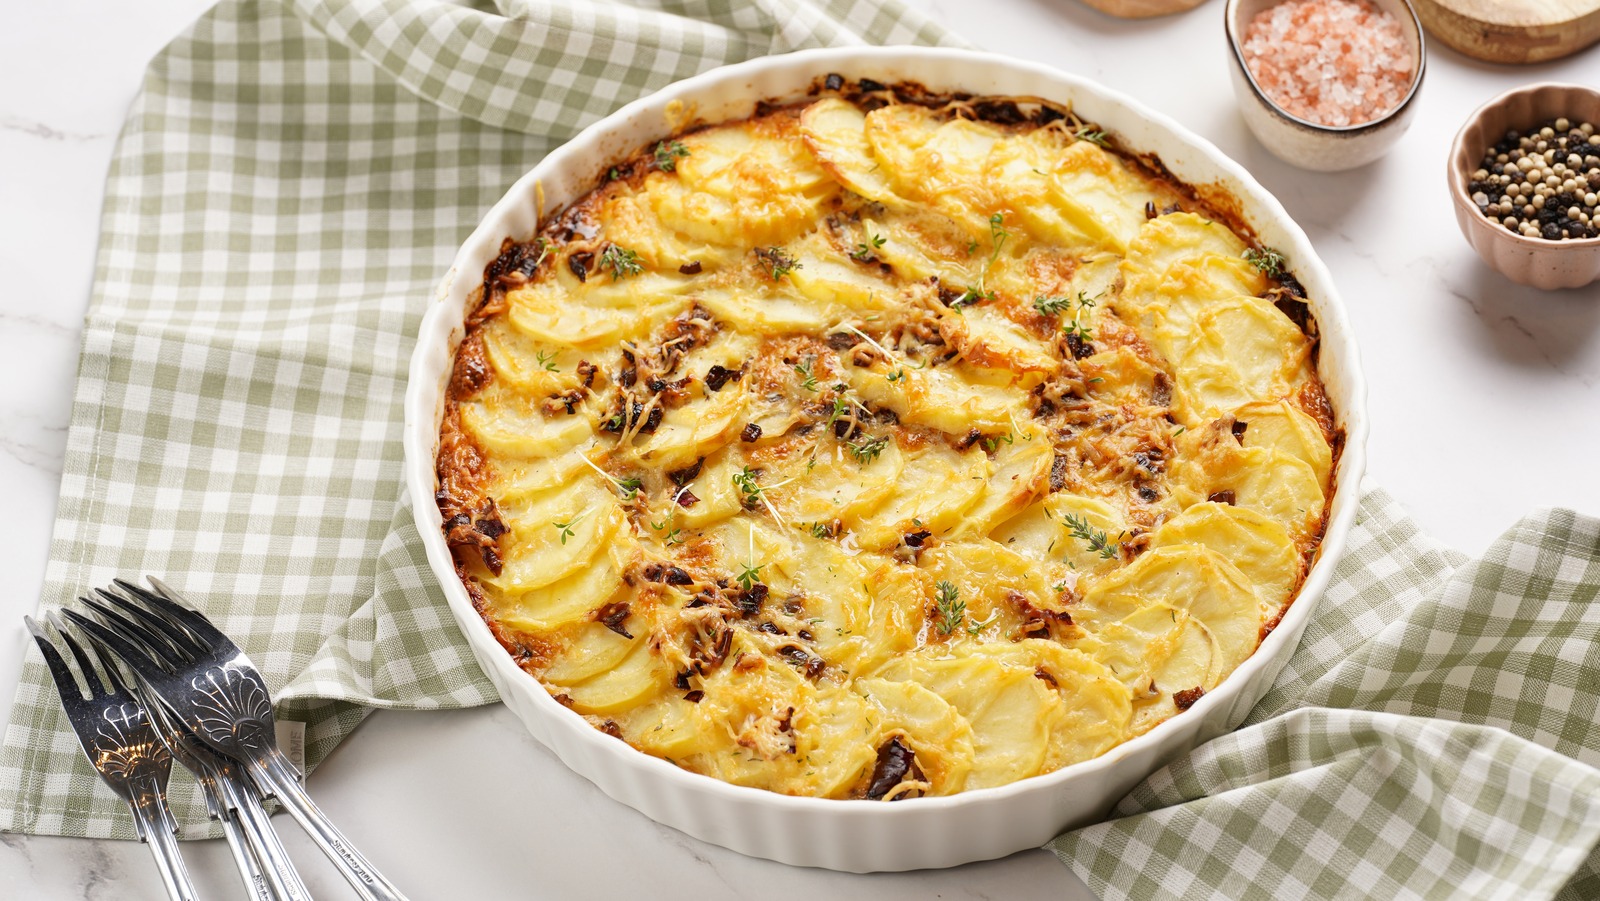 The Potent Ingredient To Intensify Au Gratin Potatoes